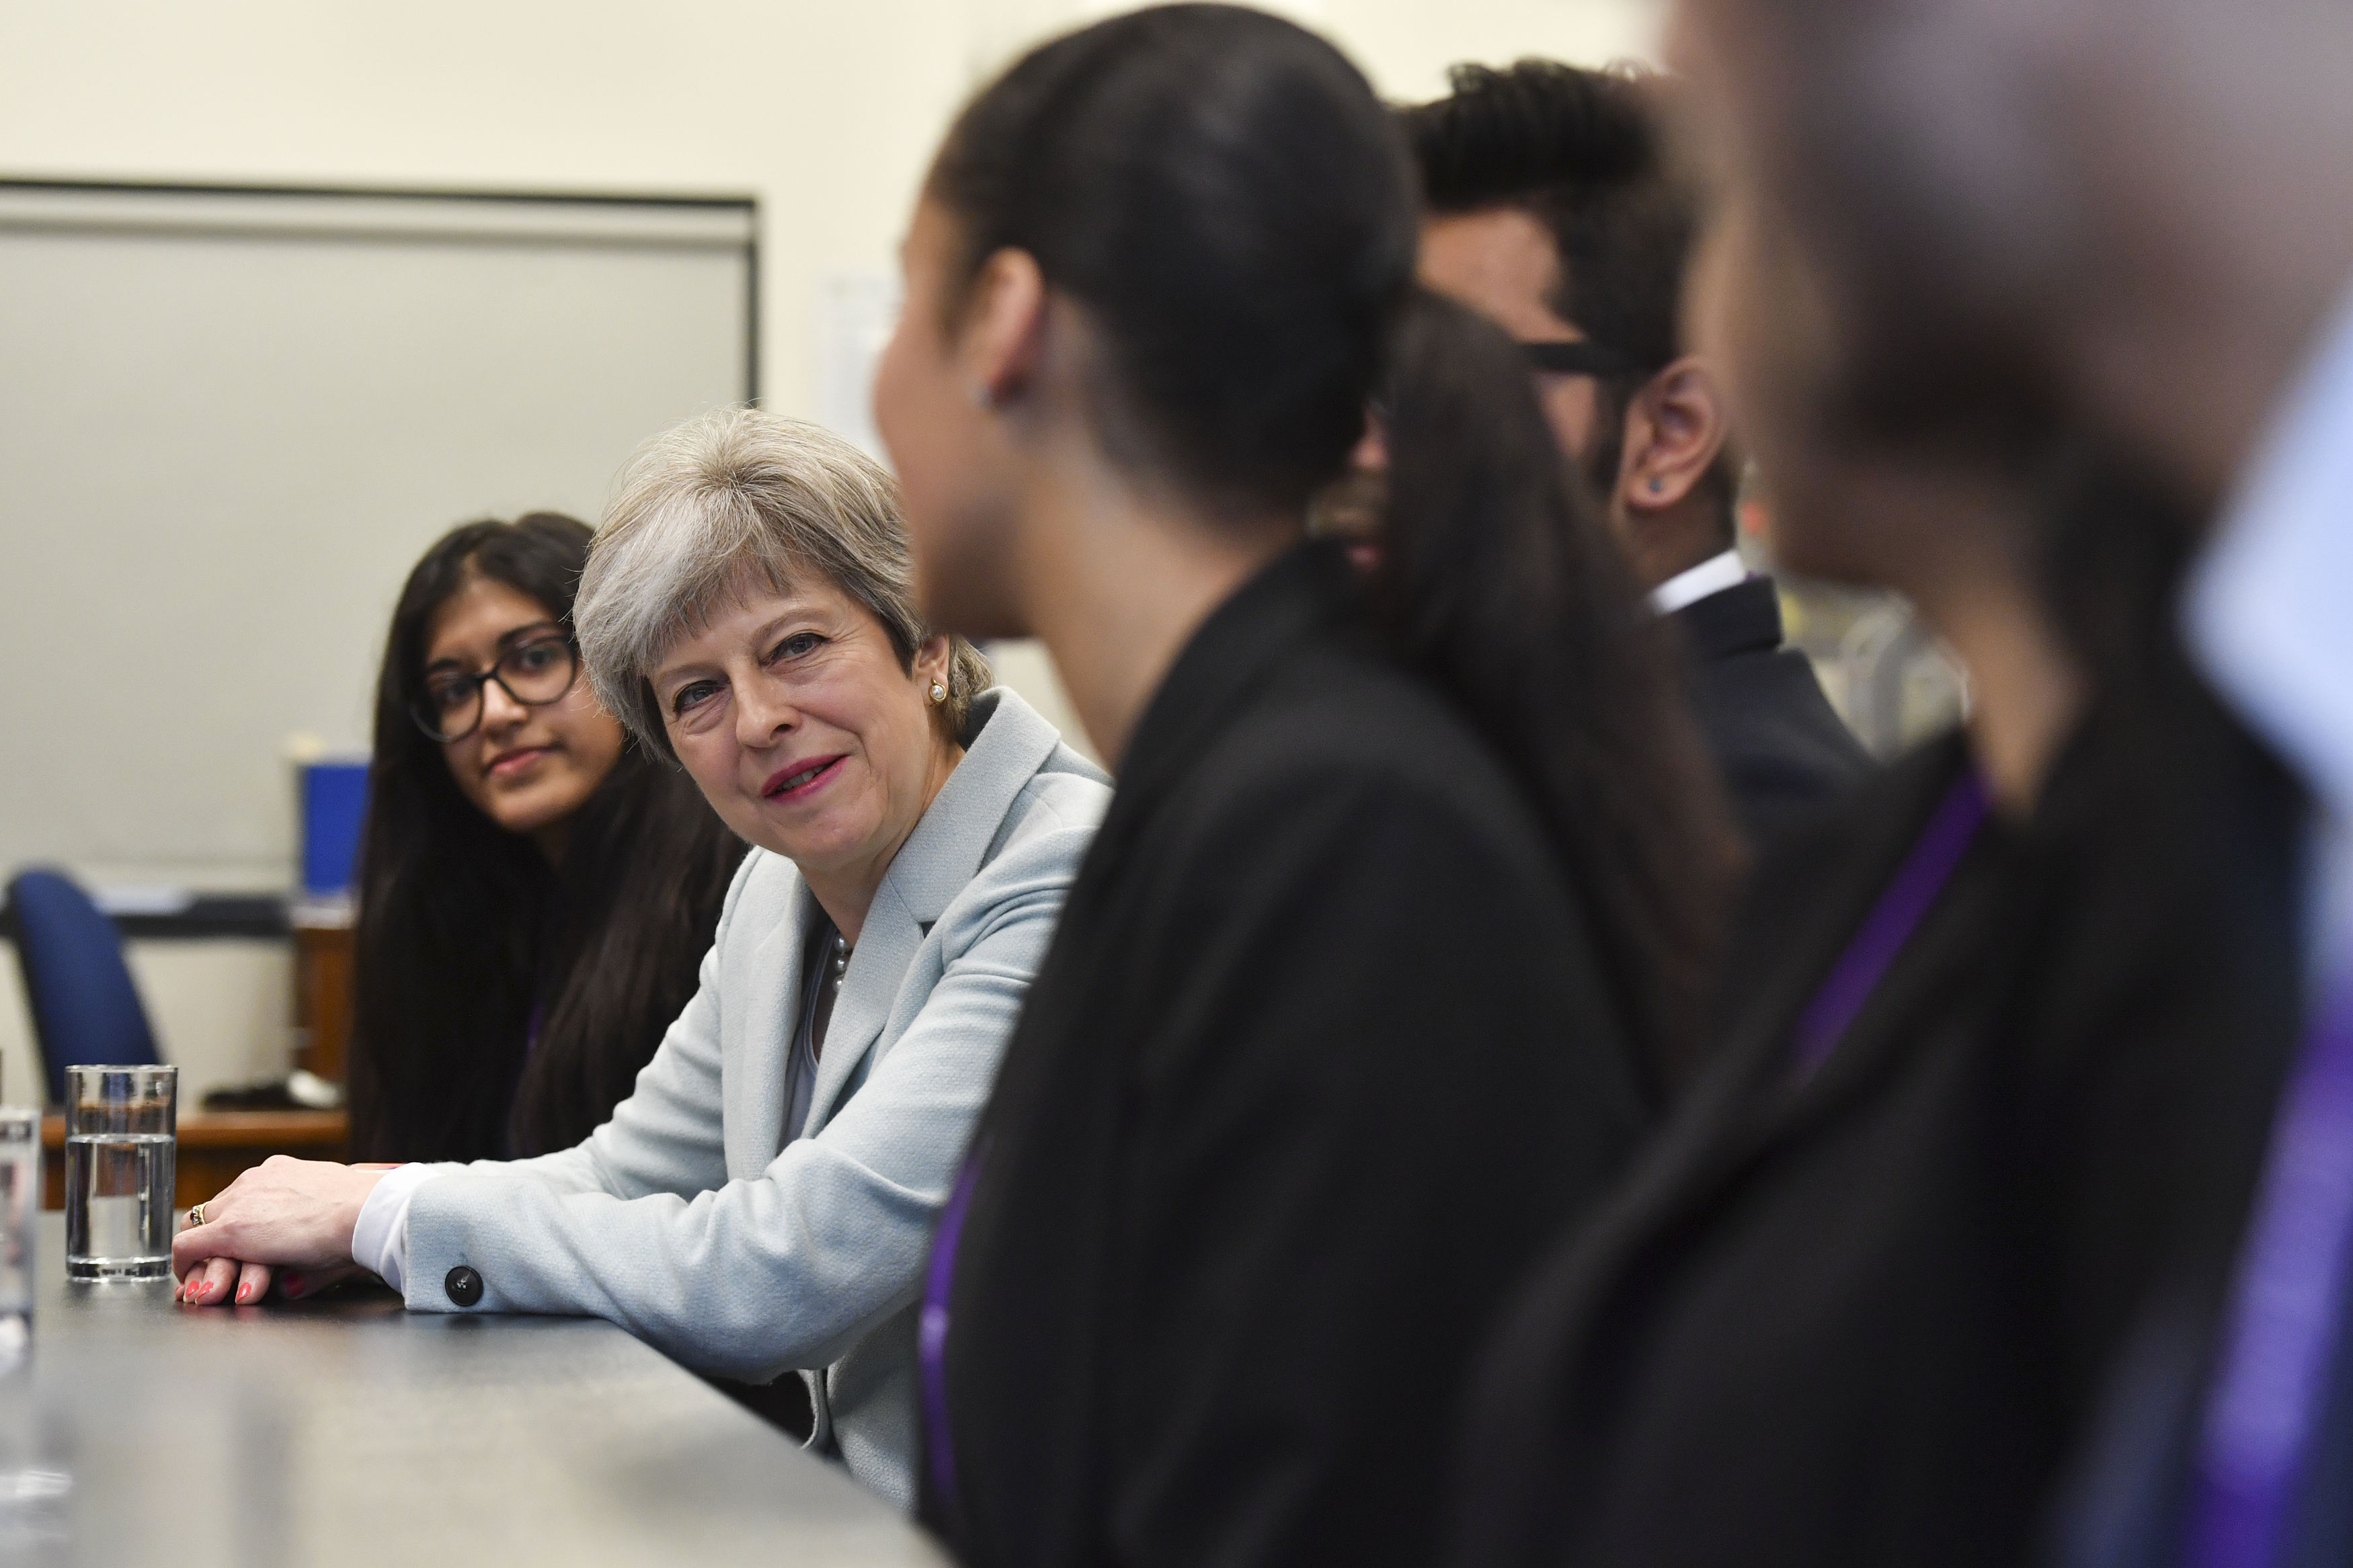 Theresa May talks with pupils and staff during a visit to Featherstone High School in west London (Ben Stansall/PA)